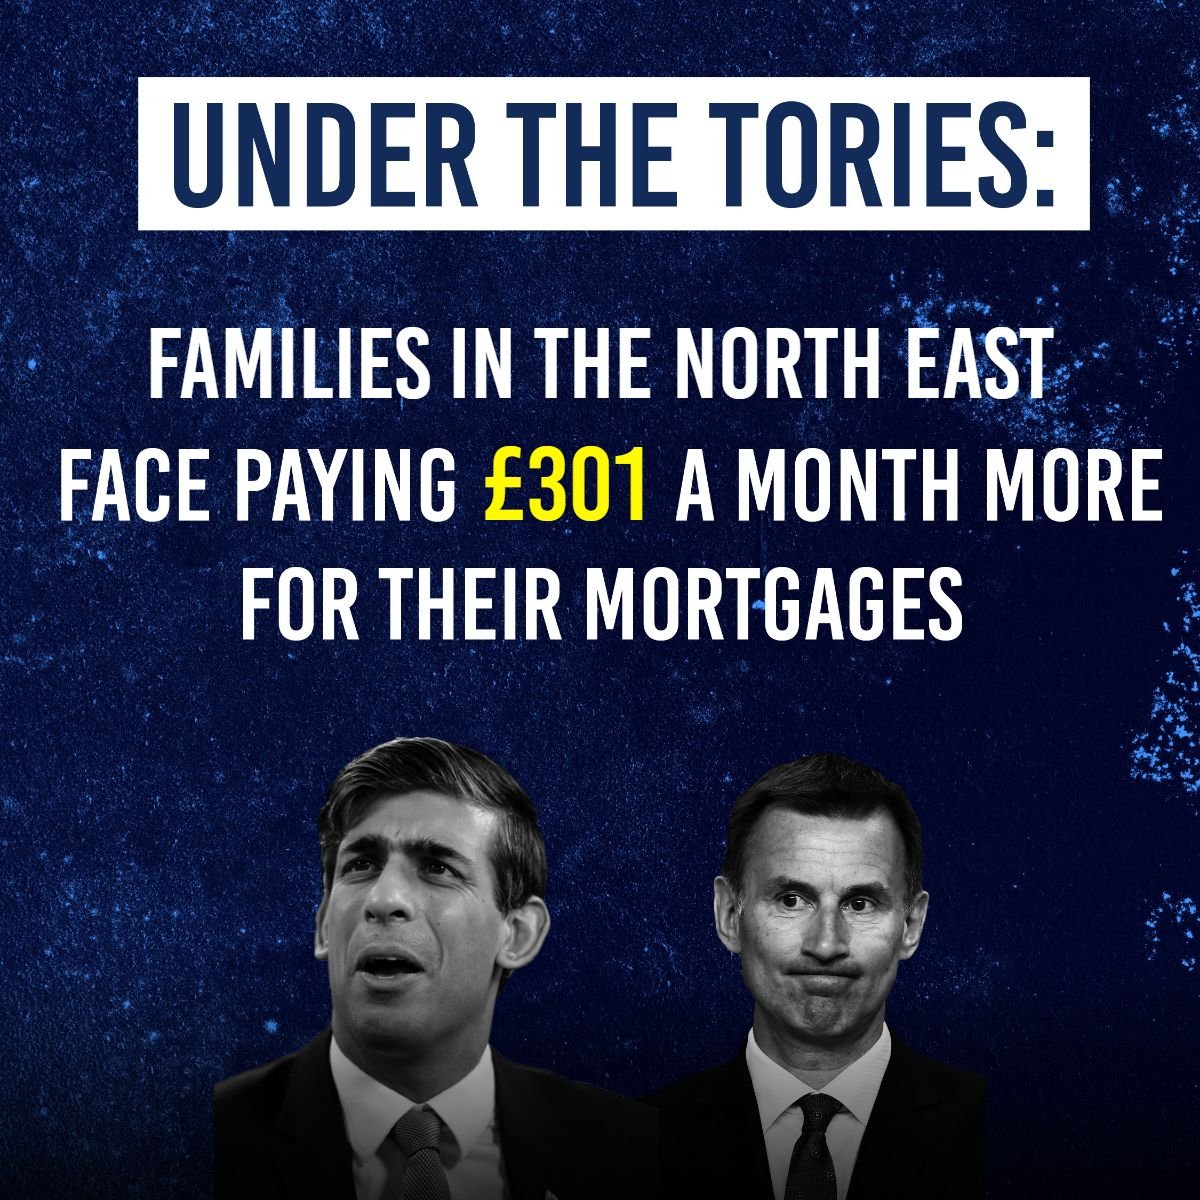 Mortgage hike with Tories – But grow the economy with Labour’s Plan